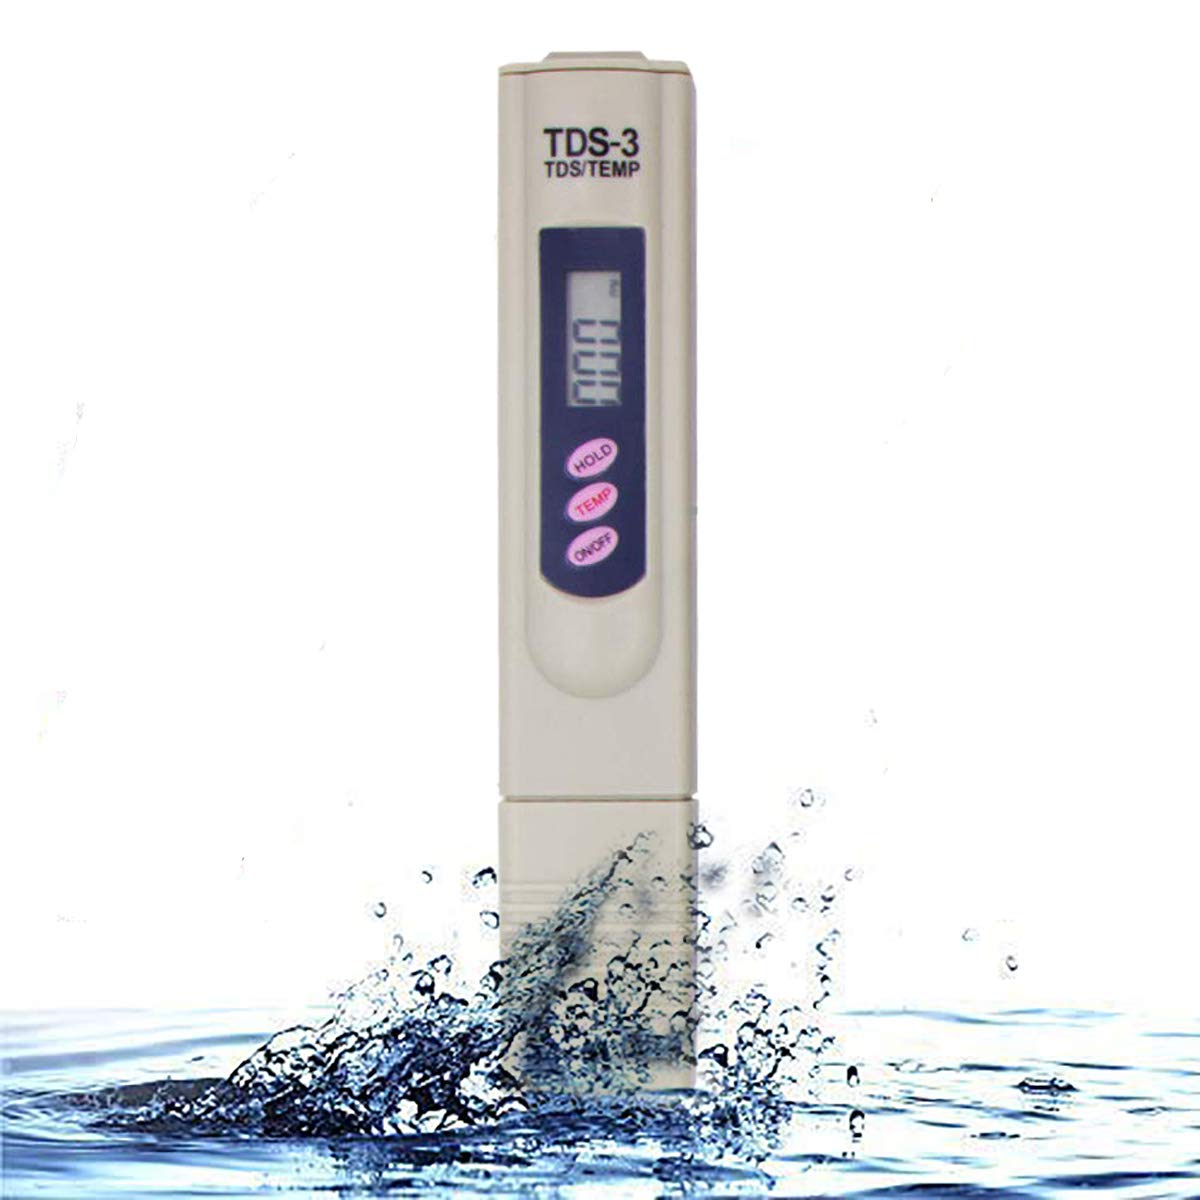 Test Water Purifier Filter Water Quality TDS Tester and Thermometer 2-in-1 With Temperature Calibration,Accurate Professional TDS Range 0-9999ppm adilon Water Quality Tester 